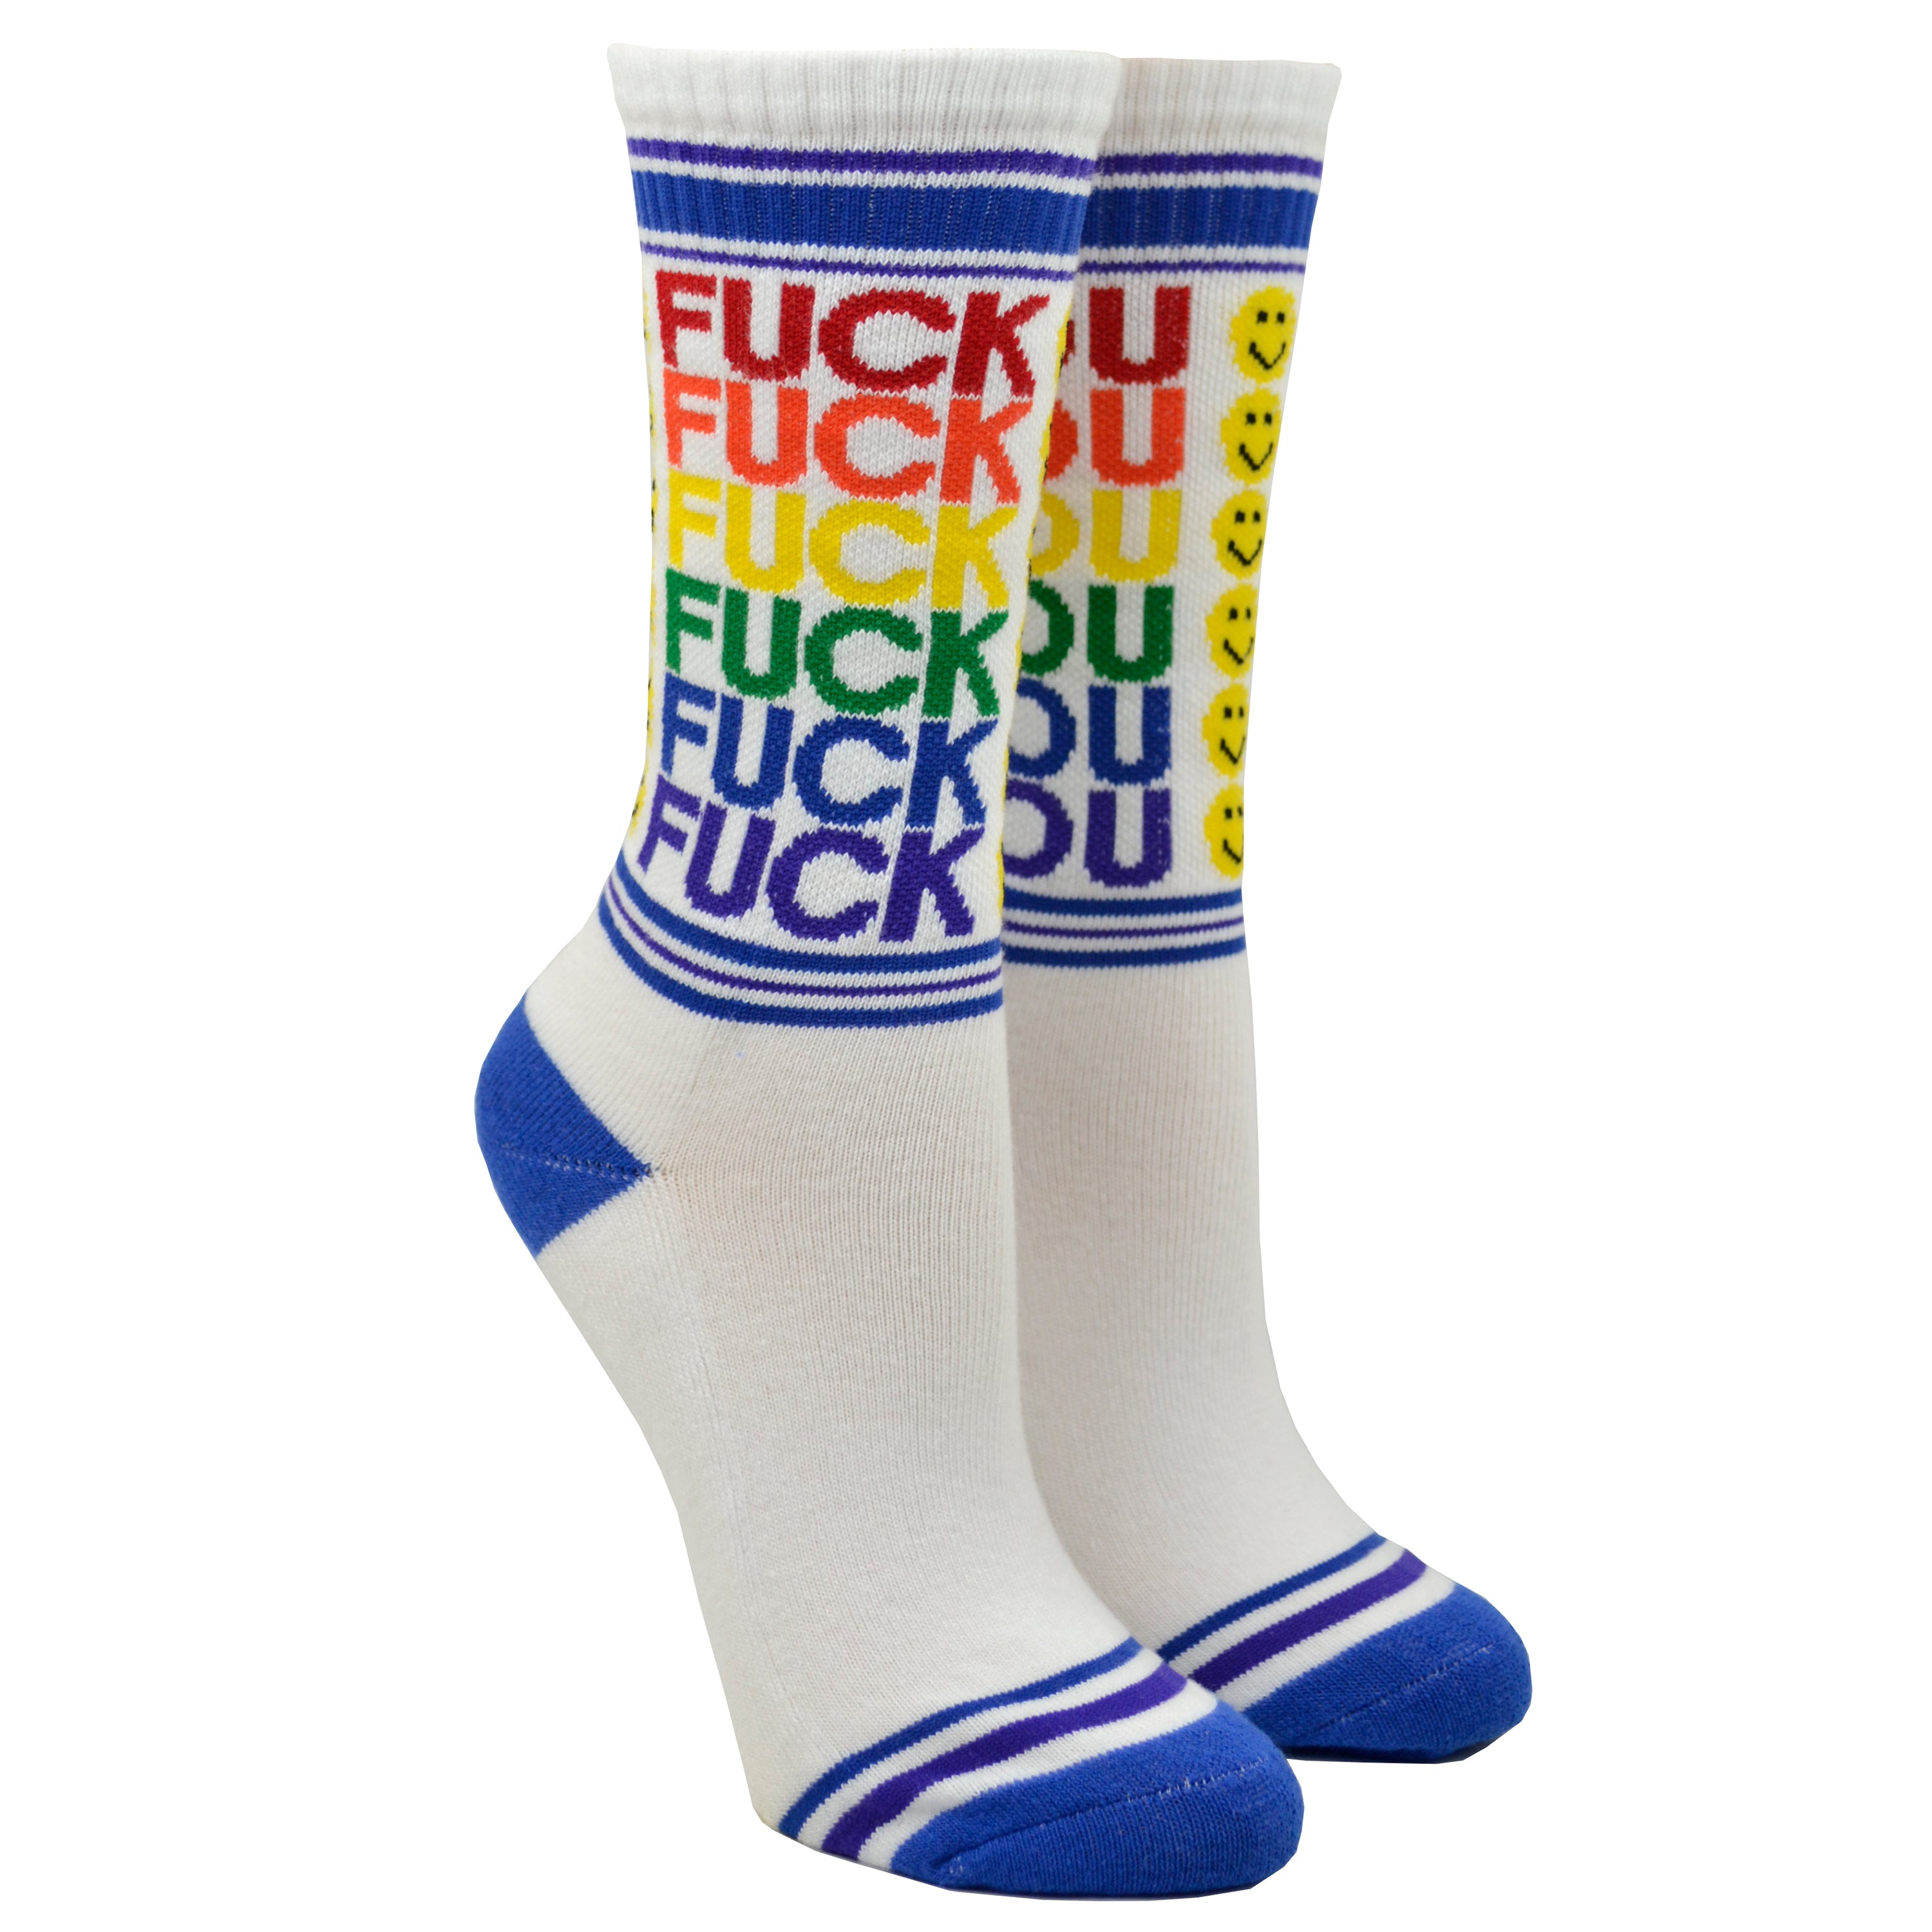 Shown on a leg form, these white cotton unisex crew socks with a blue toe and striped cuff by the brand Gumball Poodle feature the words 